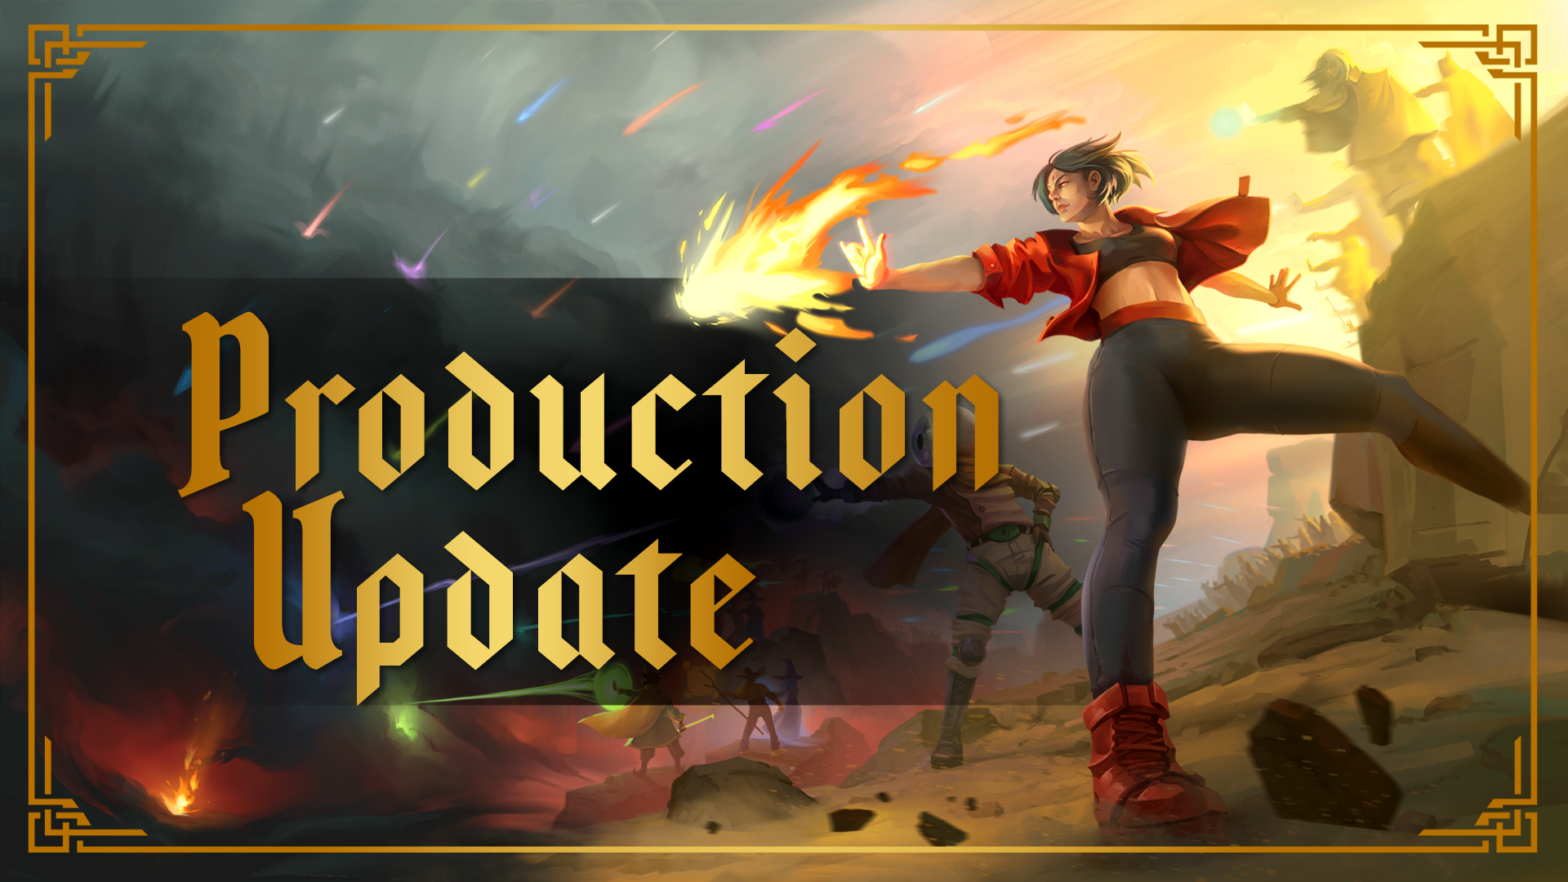 Production Update text with a background of wizards casting spells against an ominous cloud